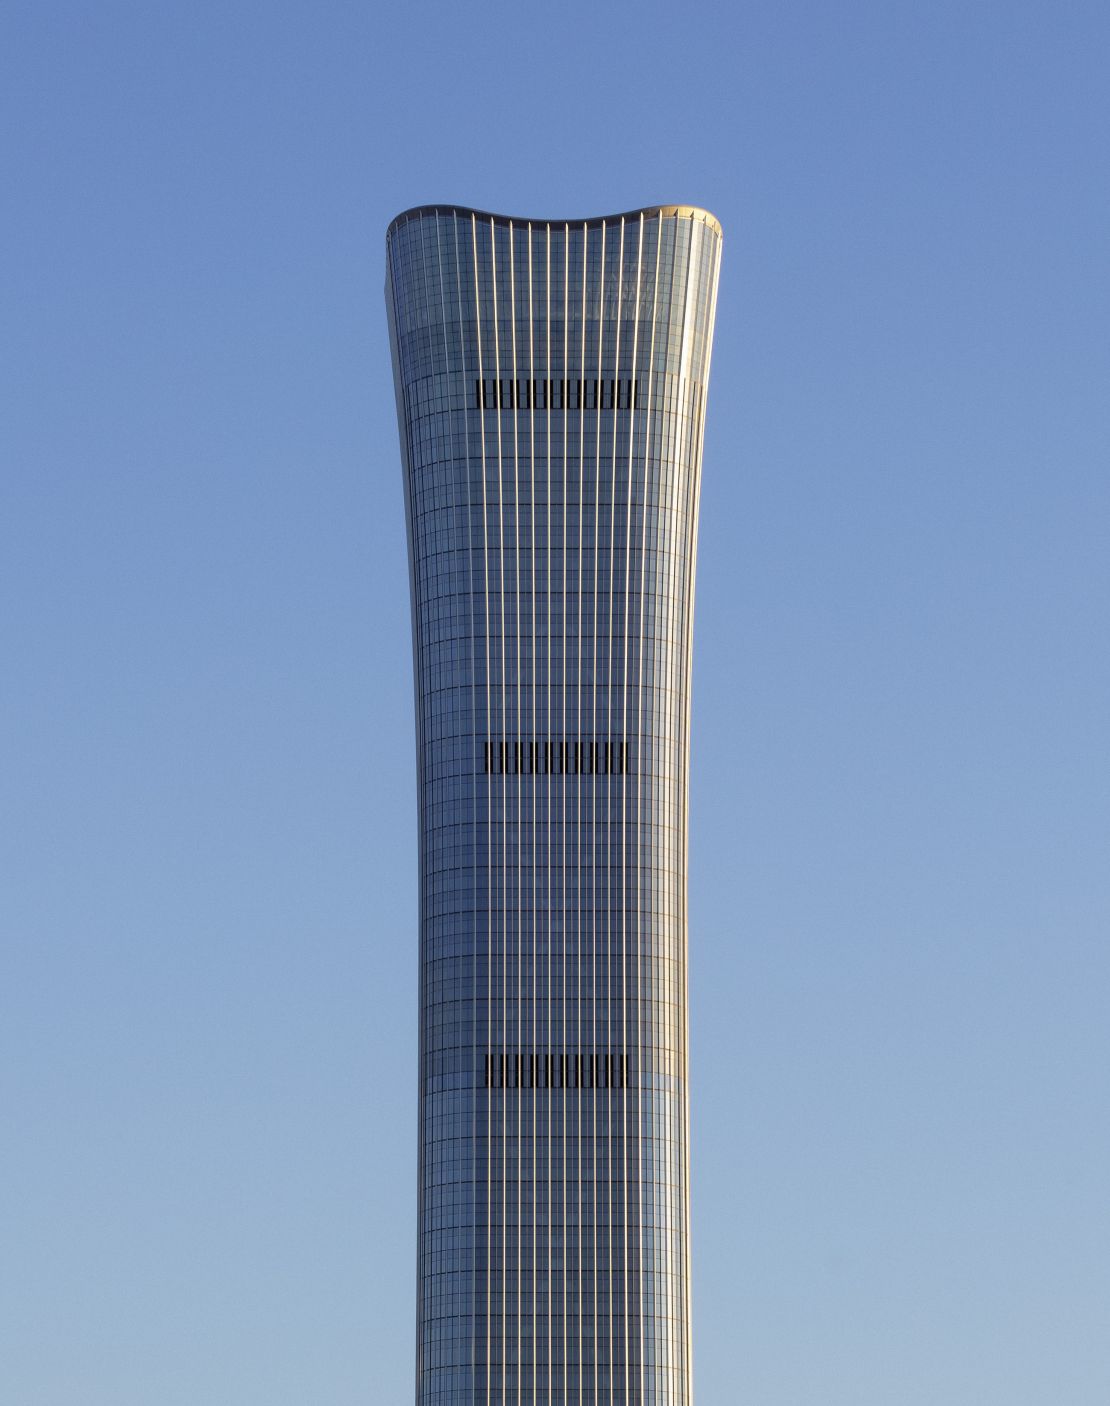 The building's flared top reaches 1,731 feet (528 meters) into the sky. 